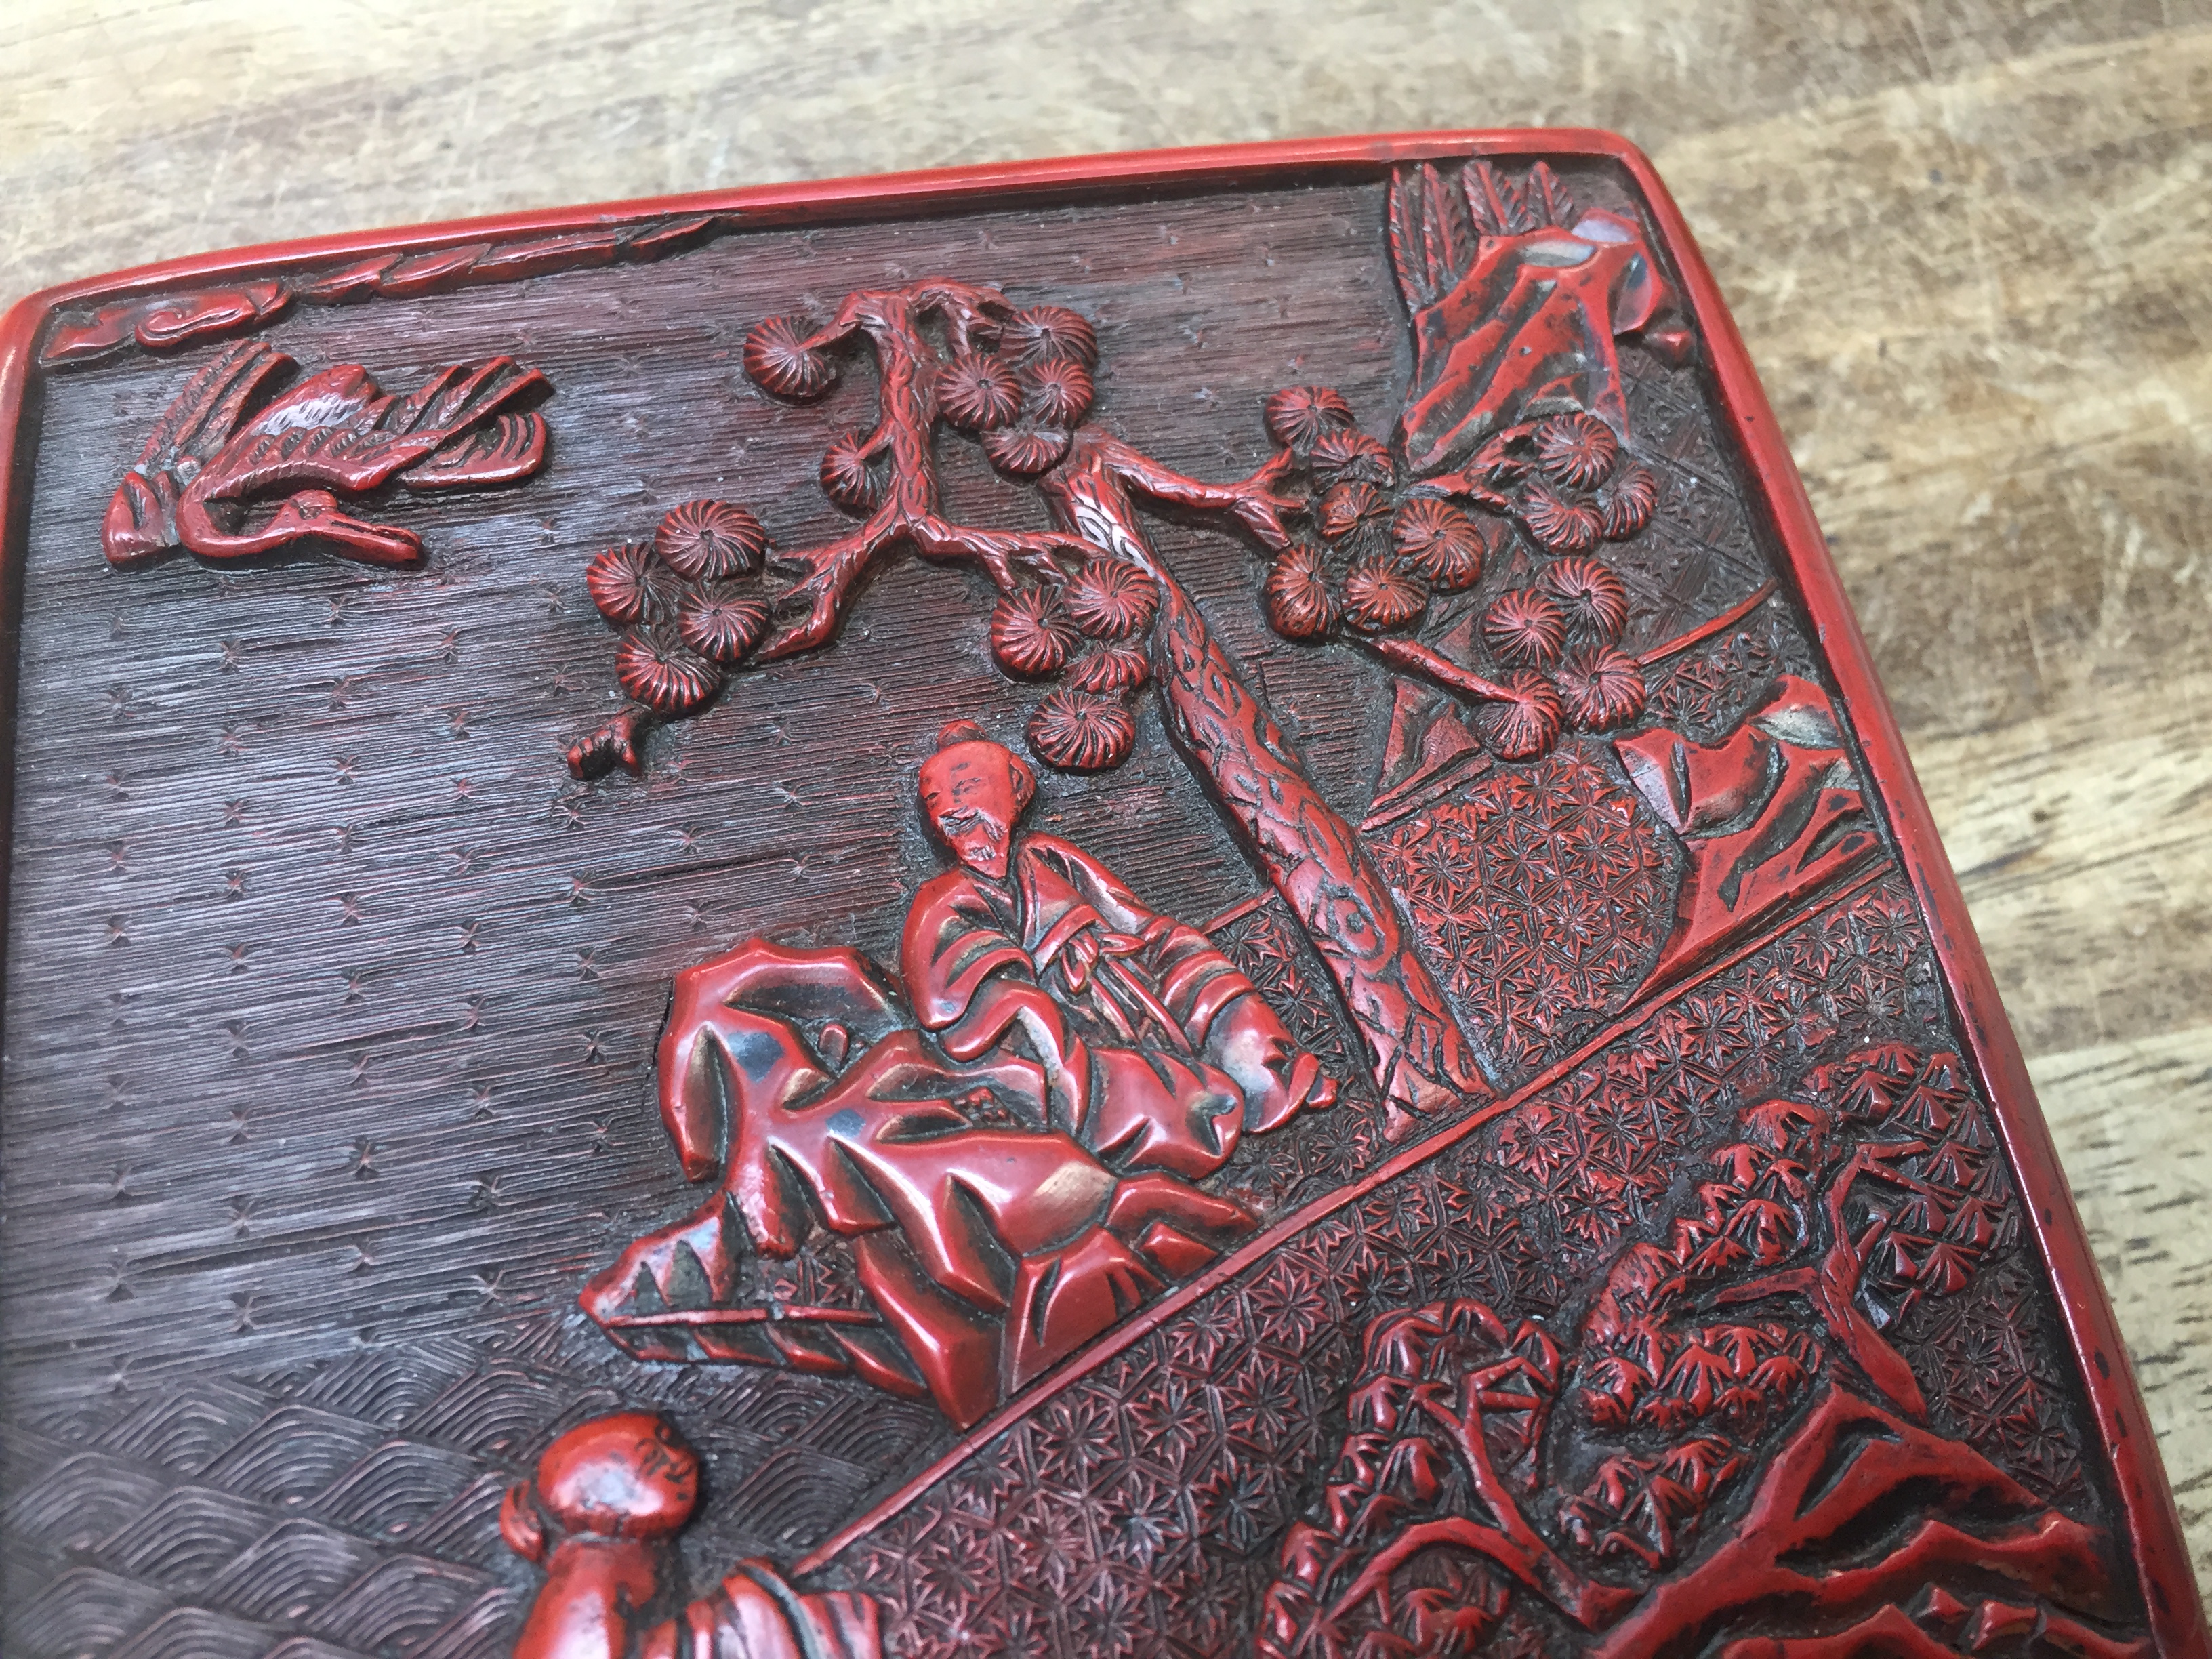 A CHINESE CINNABAR LACQUER TIERED BOX AND COVER 明 剔紅士大夫圖紋四層蓋盒 - Image 6 of 38